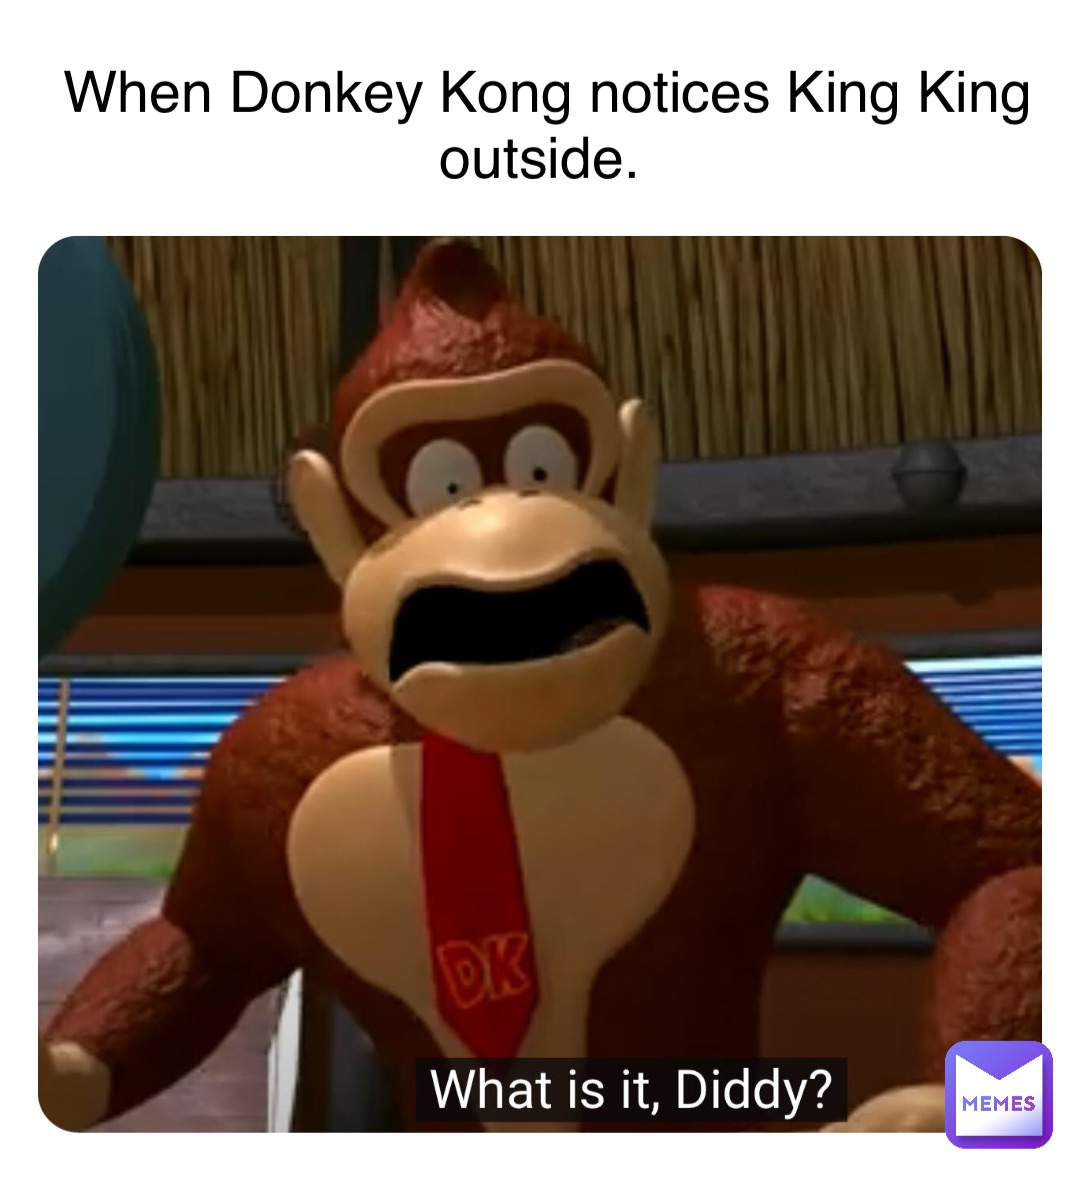 When Donkey Kong notices King King outside.